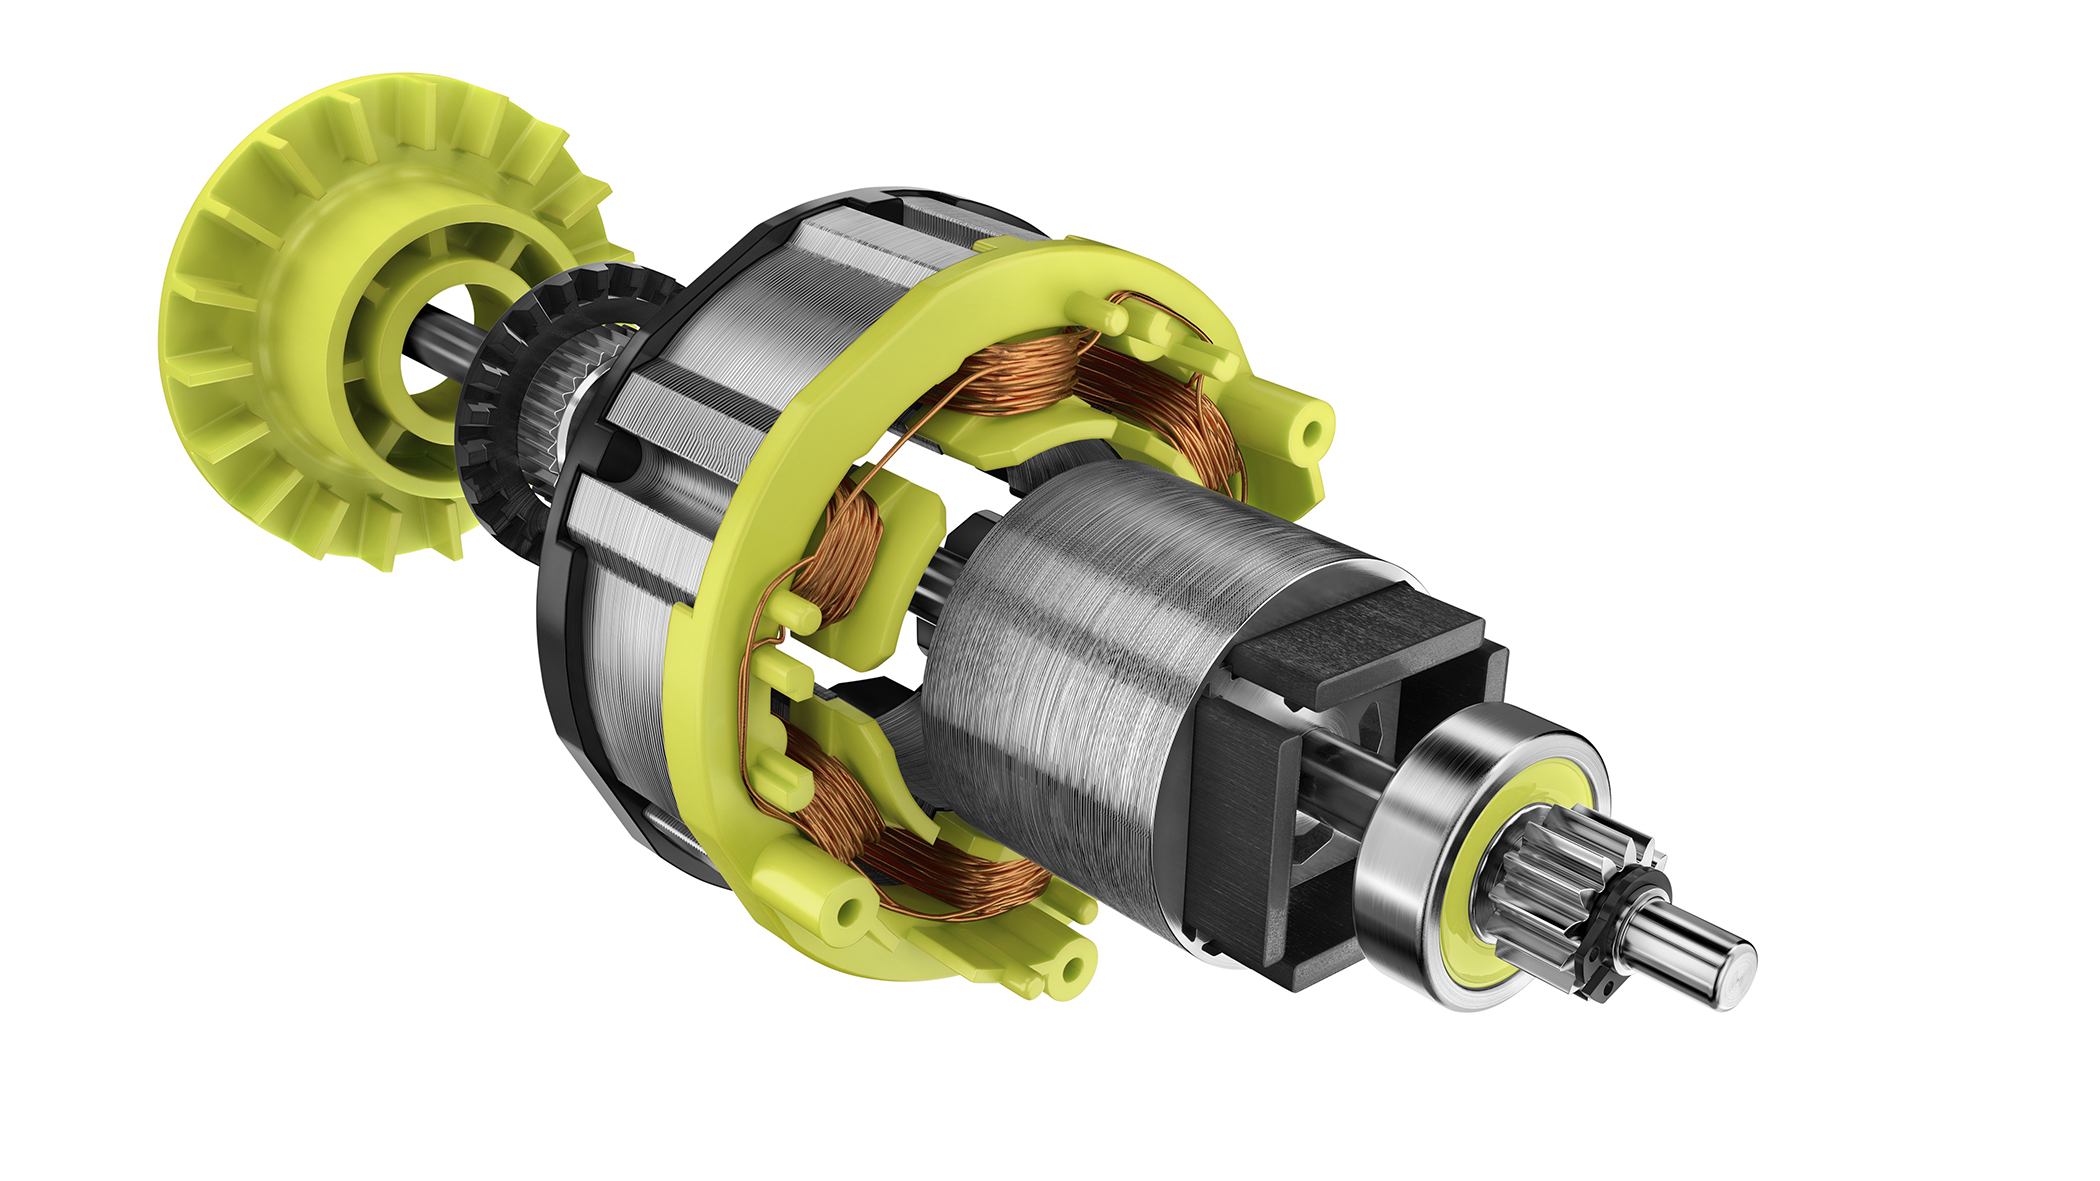 Up to 20% Faster Drilling and 25% Faster Driving